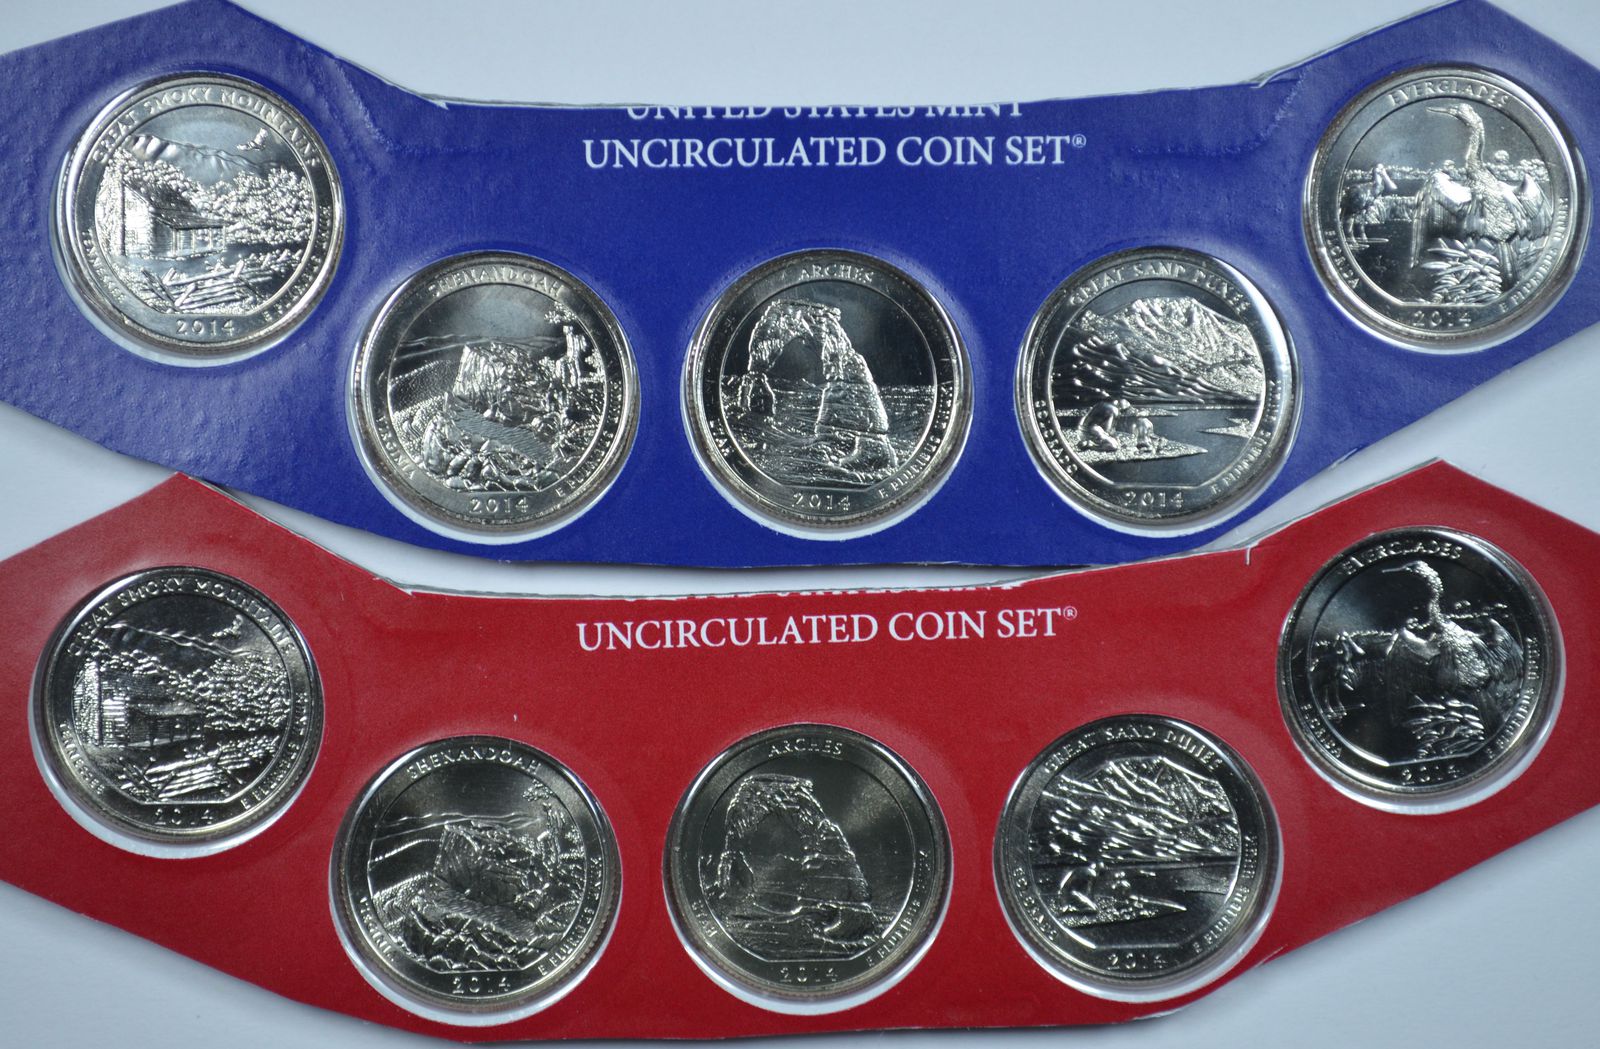 2014 P & D America the Beautiful uncirculated quarters in mint cello  - $14.50